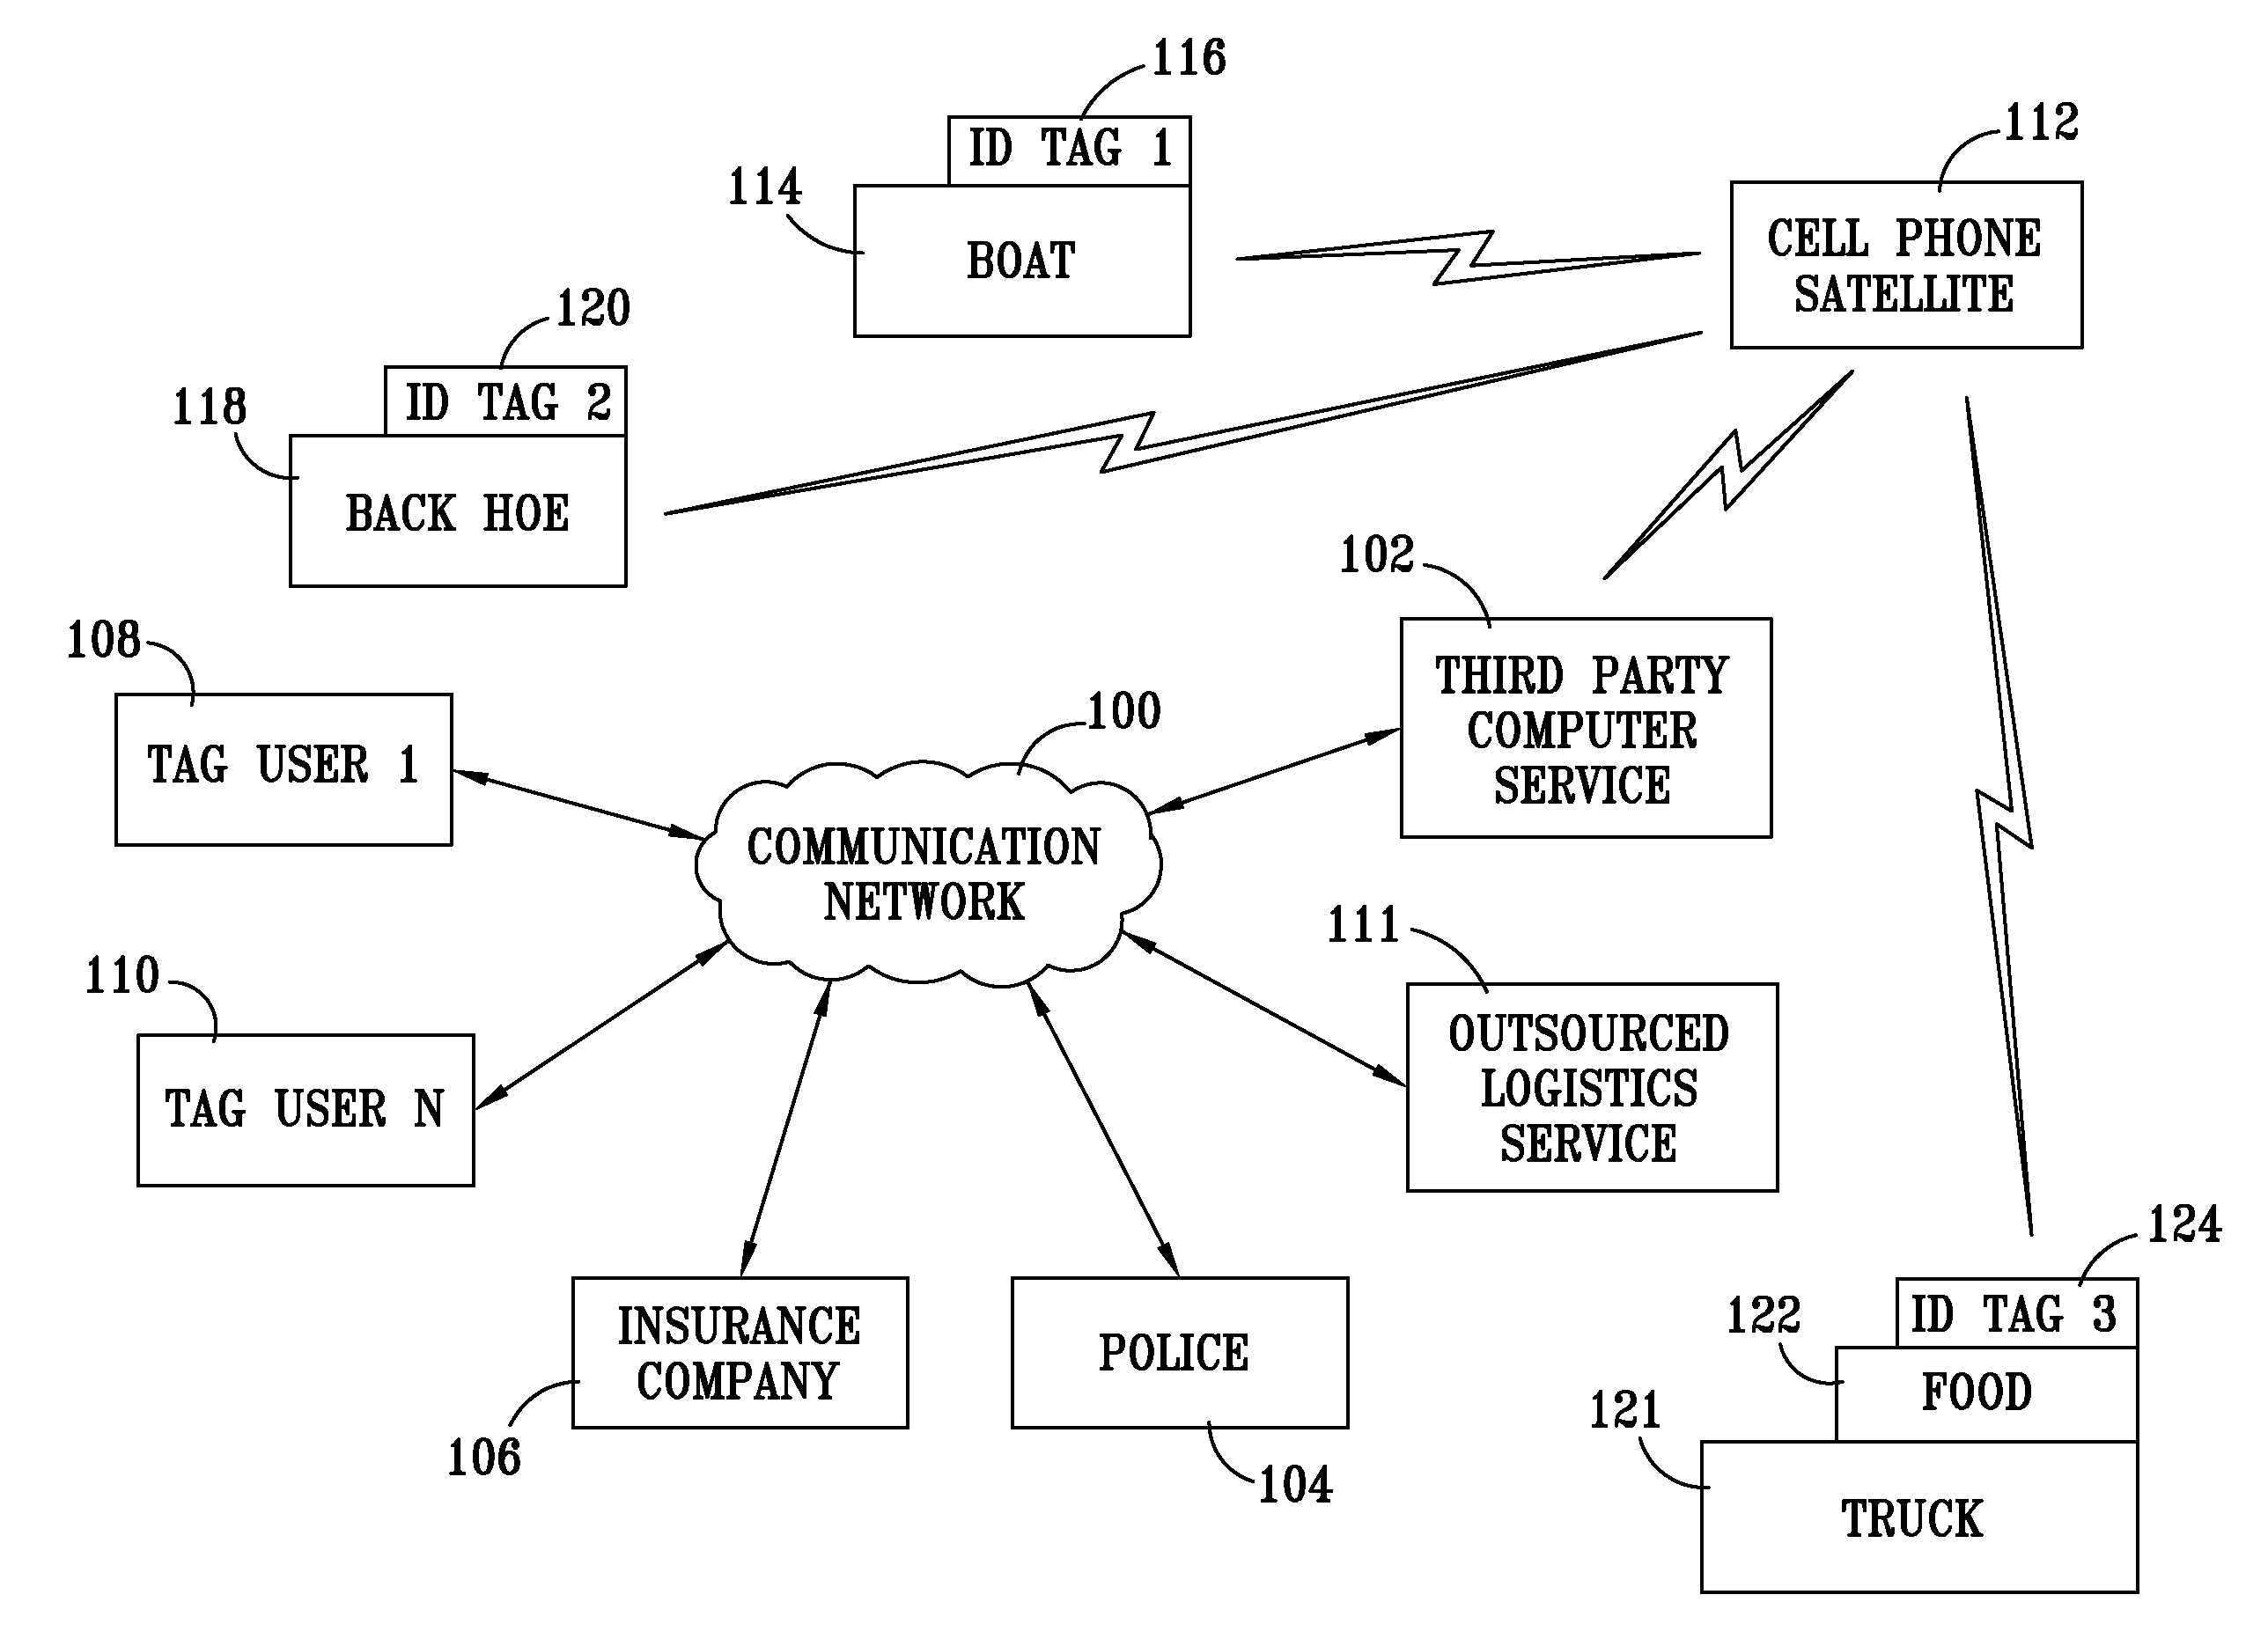 Method and apparatus for locating and/or otherwise monitoring an ID tagged asset's condition